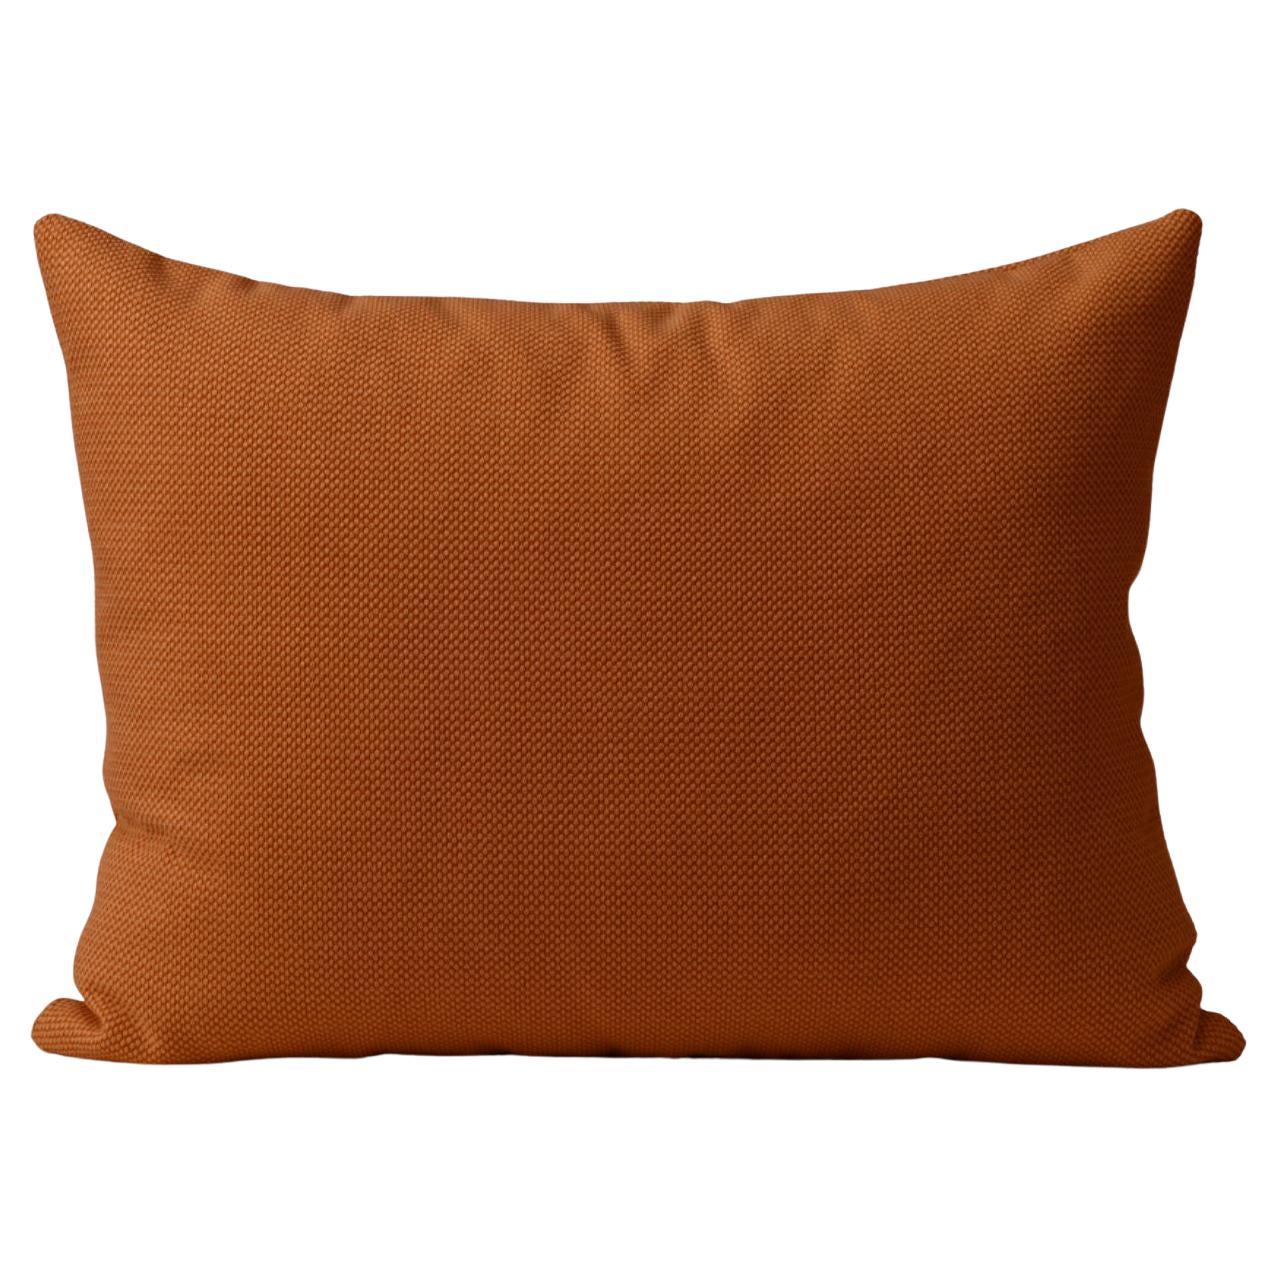 Galore Cushion Square Terracotta by Warm Nordic For Sale